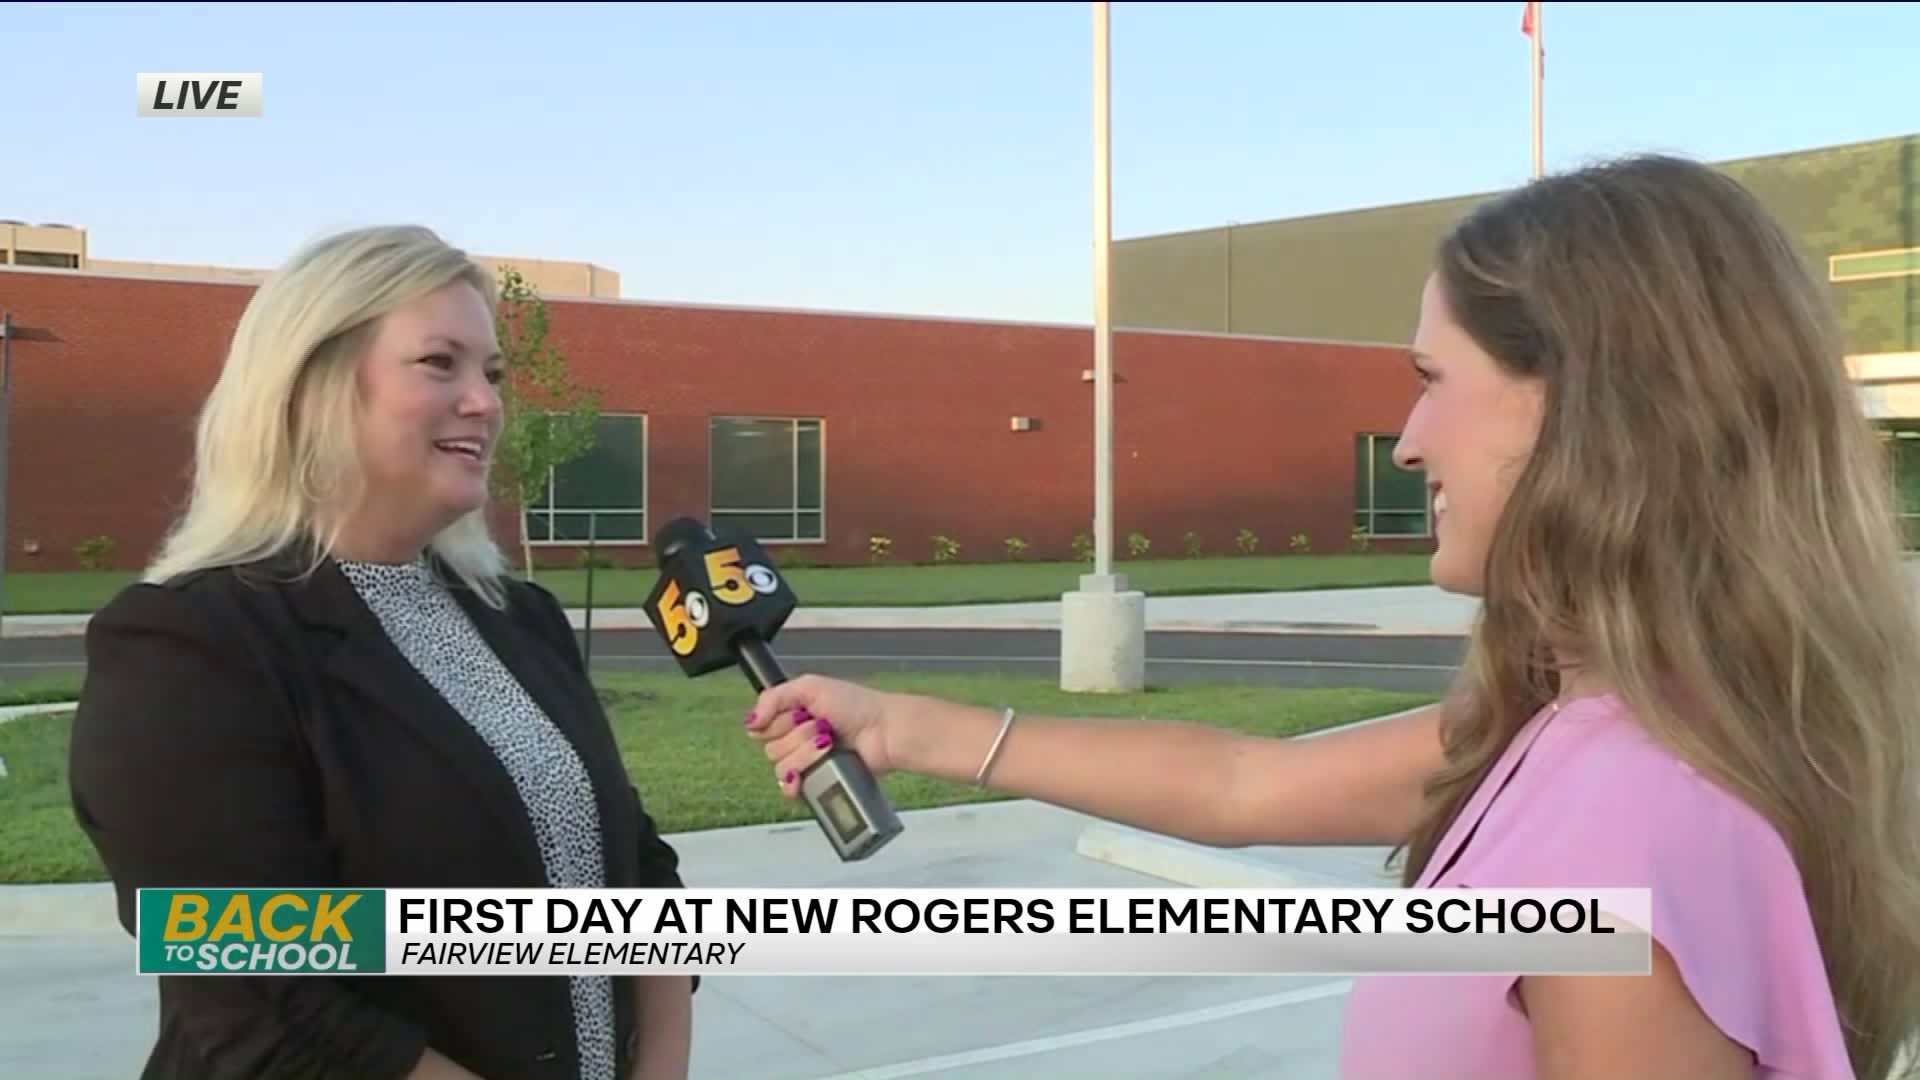 FIRST DAY AT NEW ROGERS ELEMENTARY SCHOOL